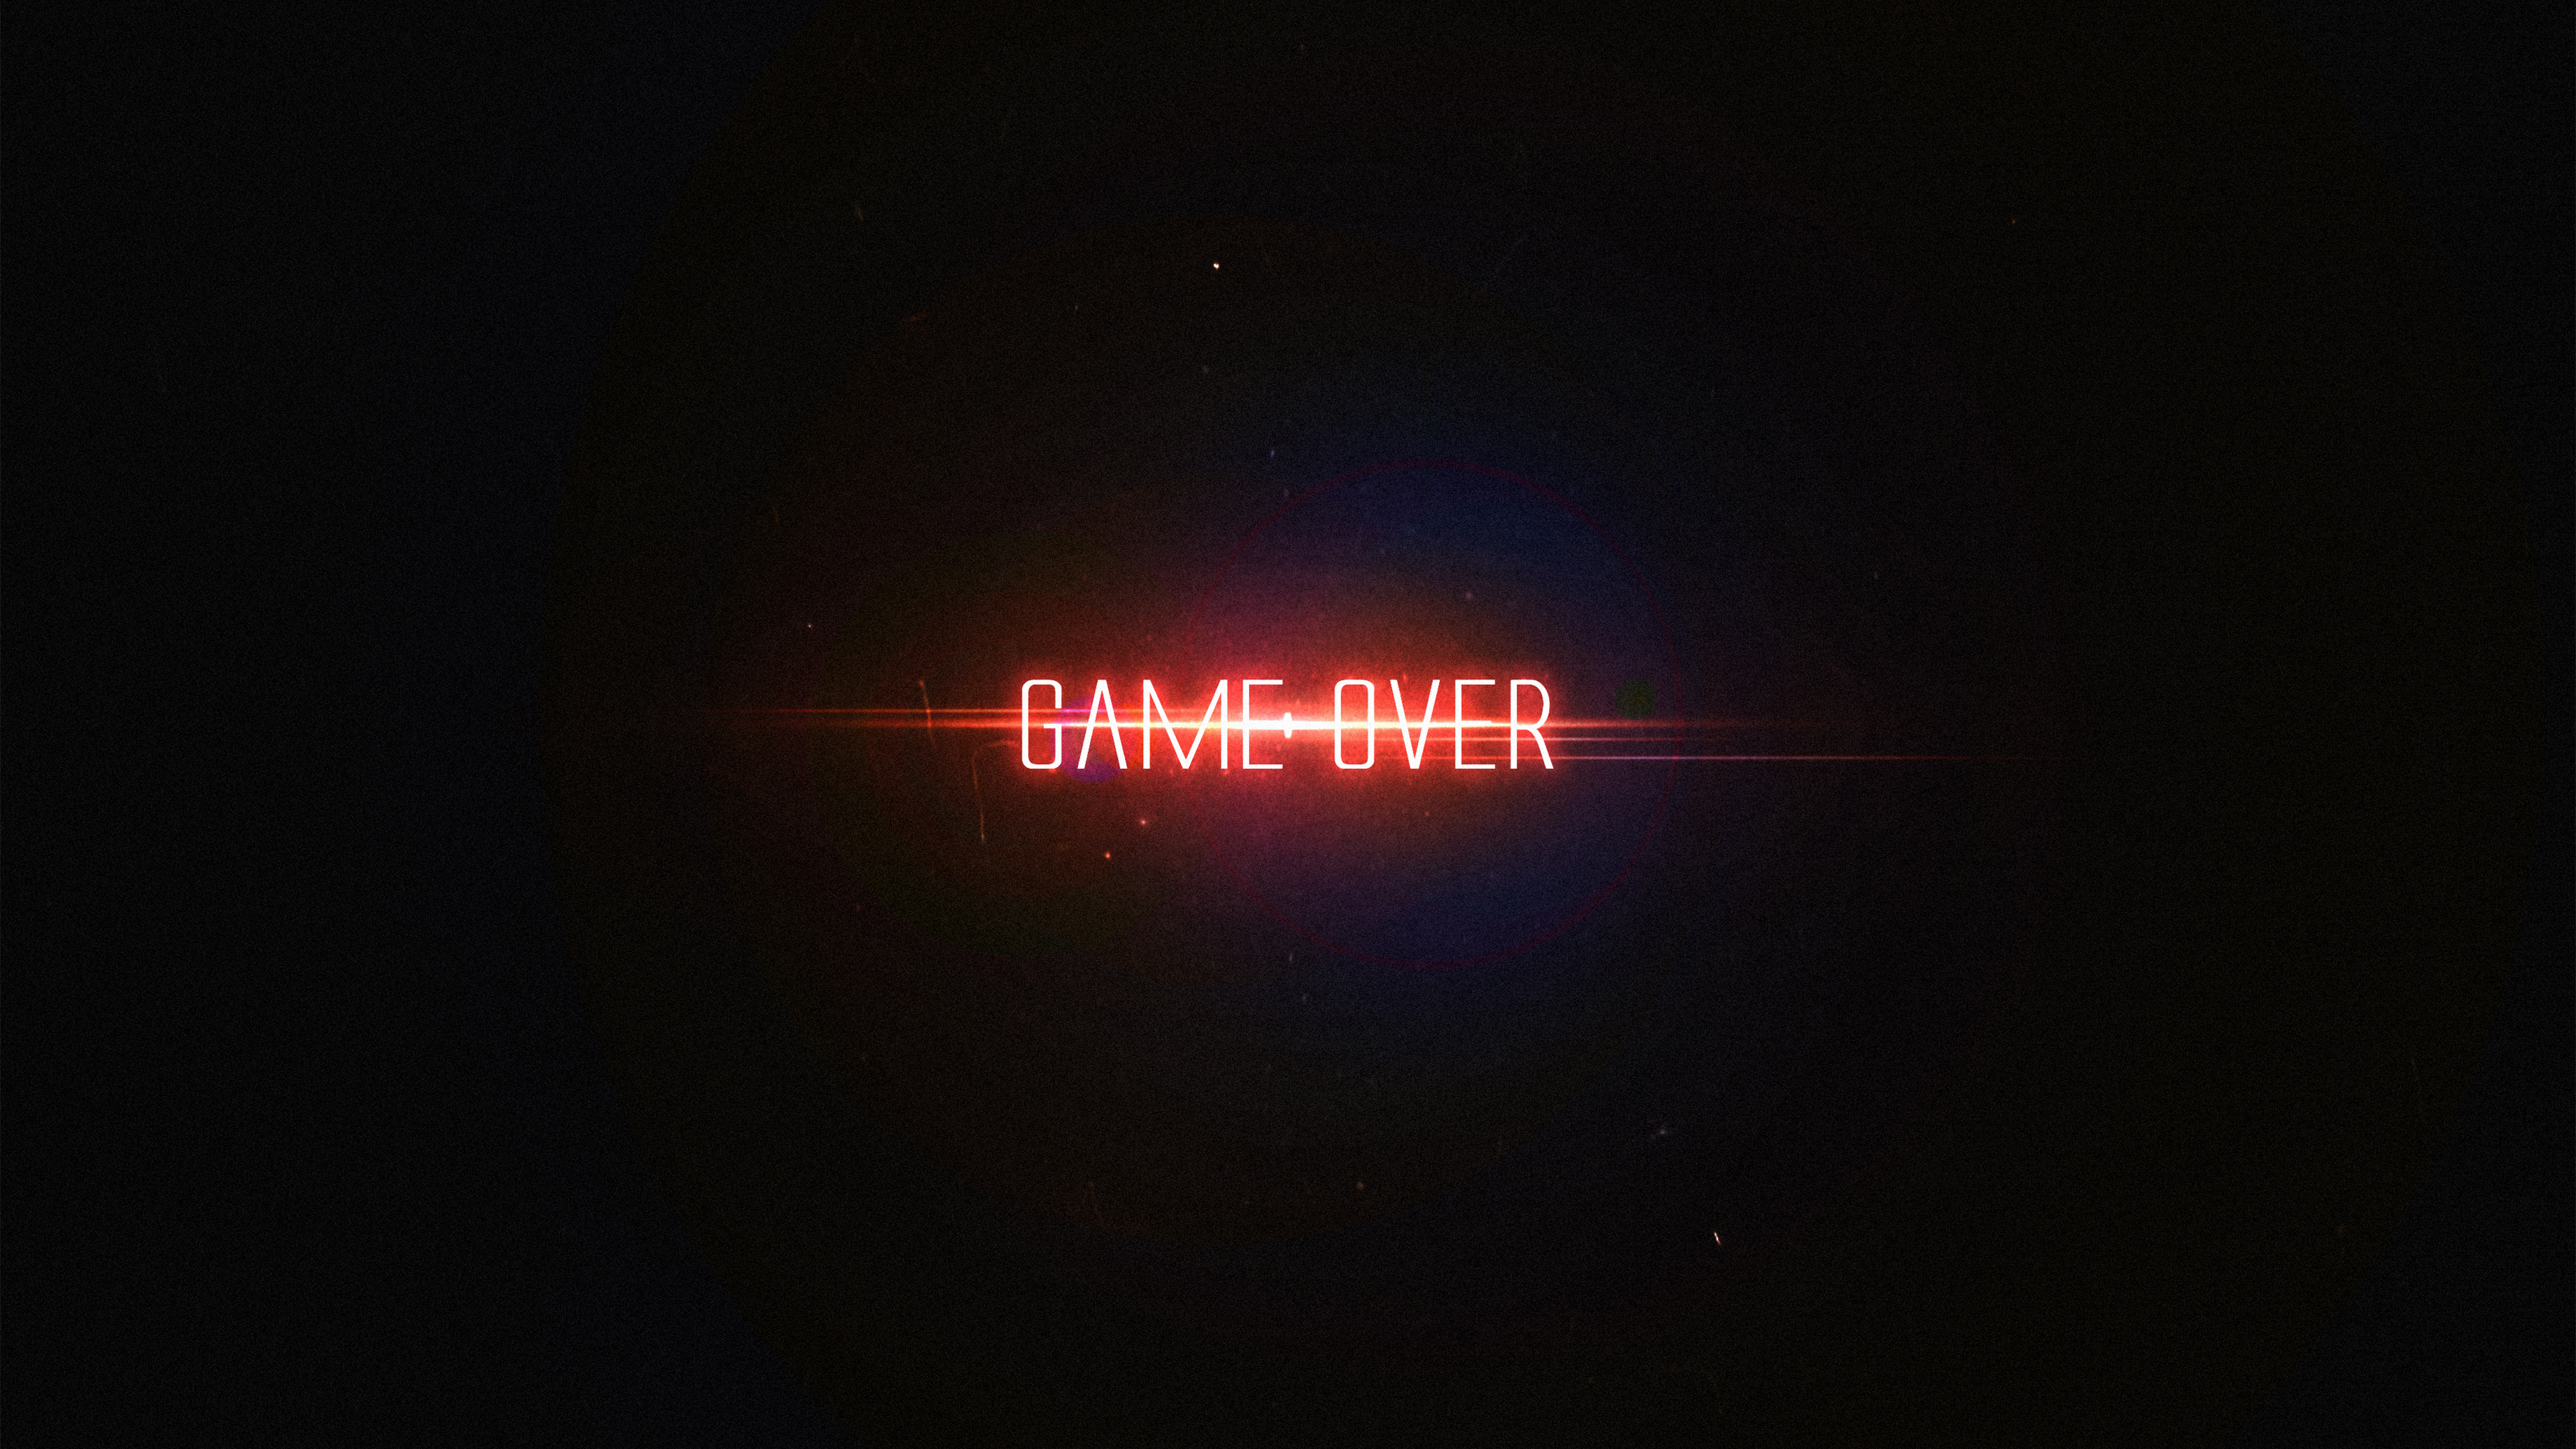 Video Game Game Over 4k Ultra HD Wallpaper by Martin Kaye